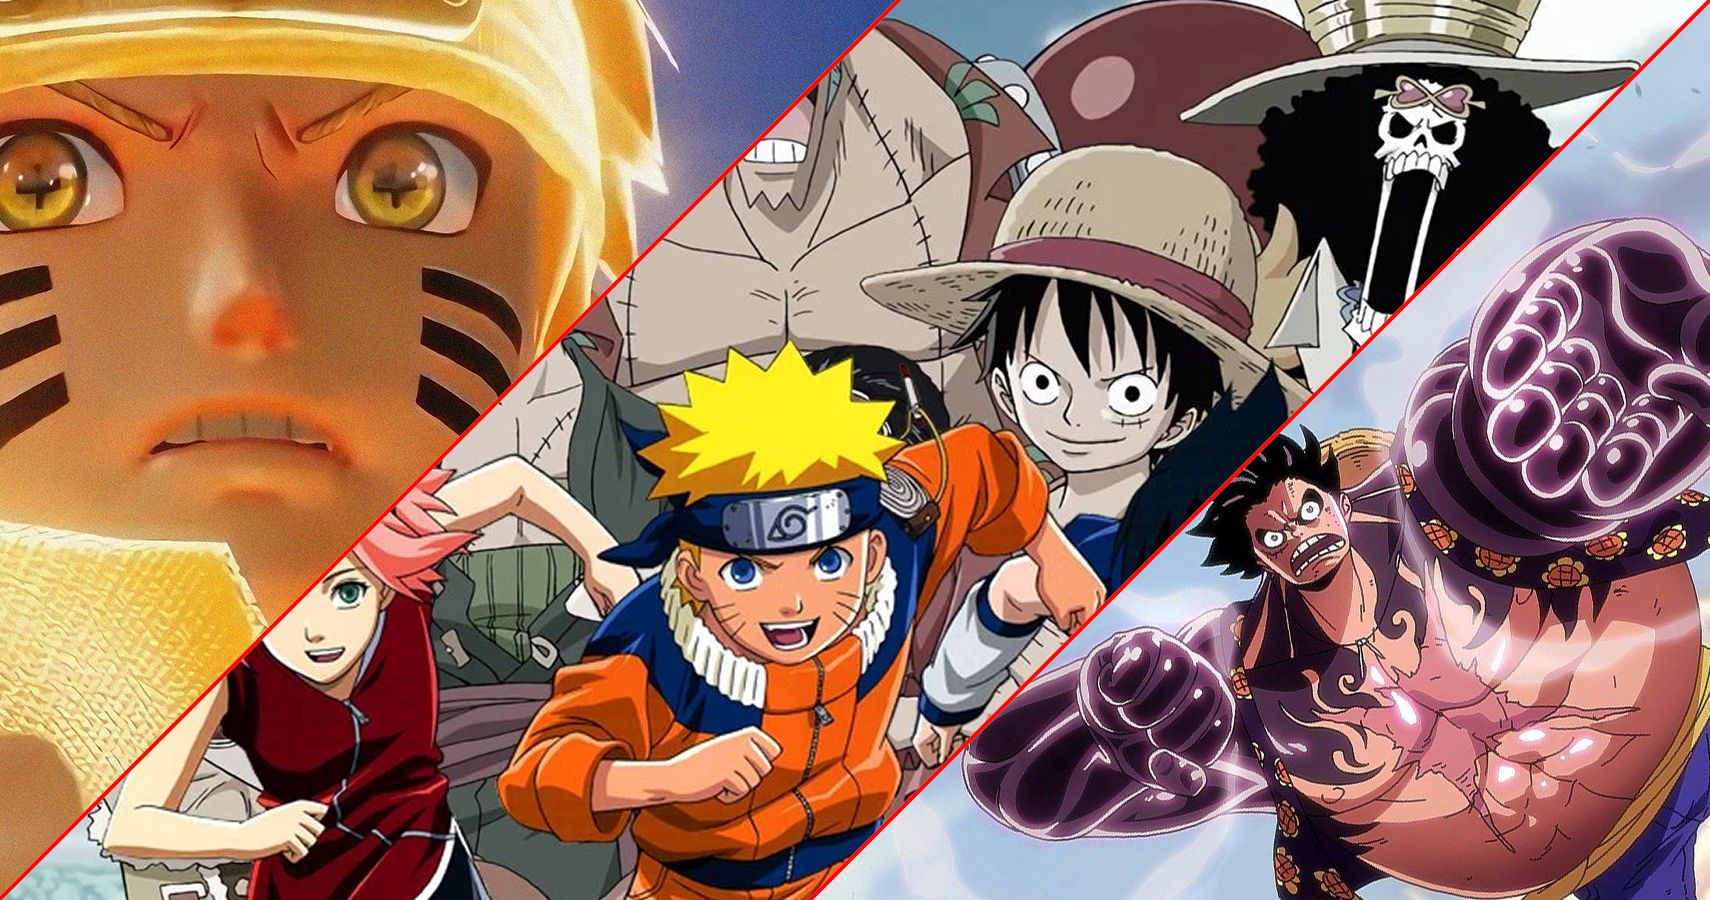 One Piece Haki vs Naruto's Chakra: Which one is the strongest?